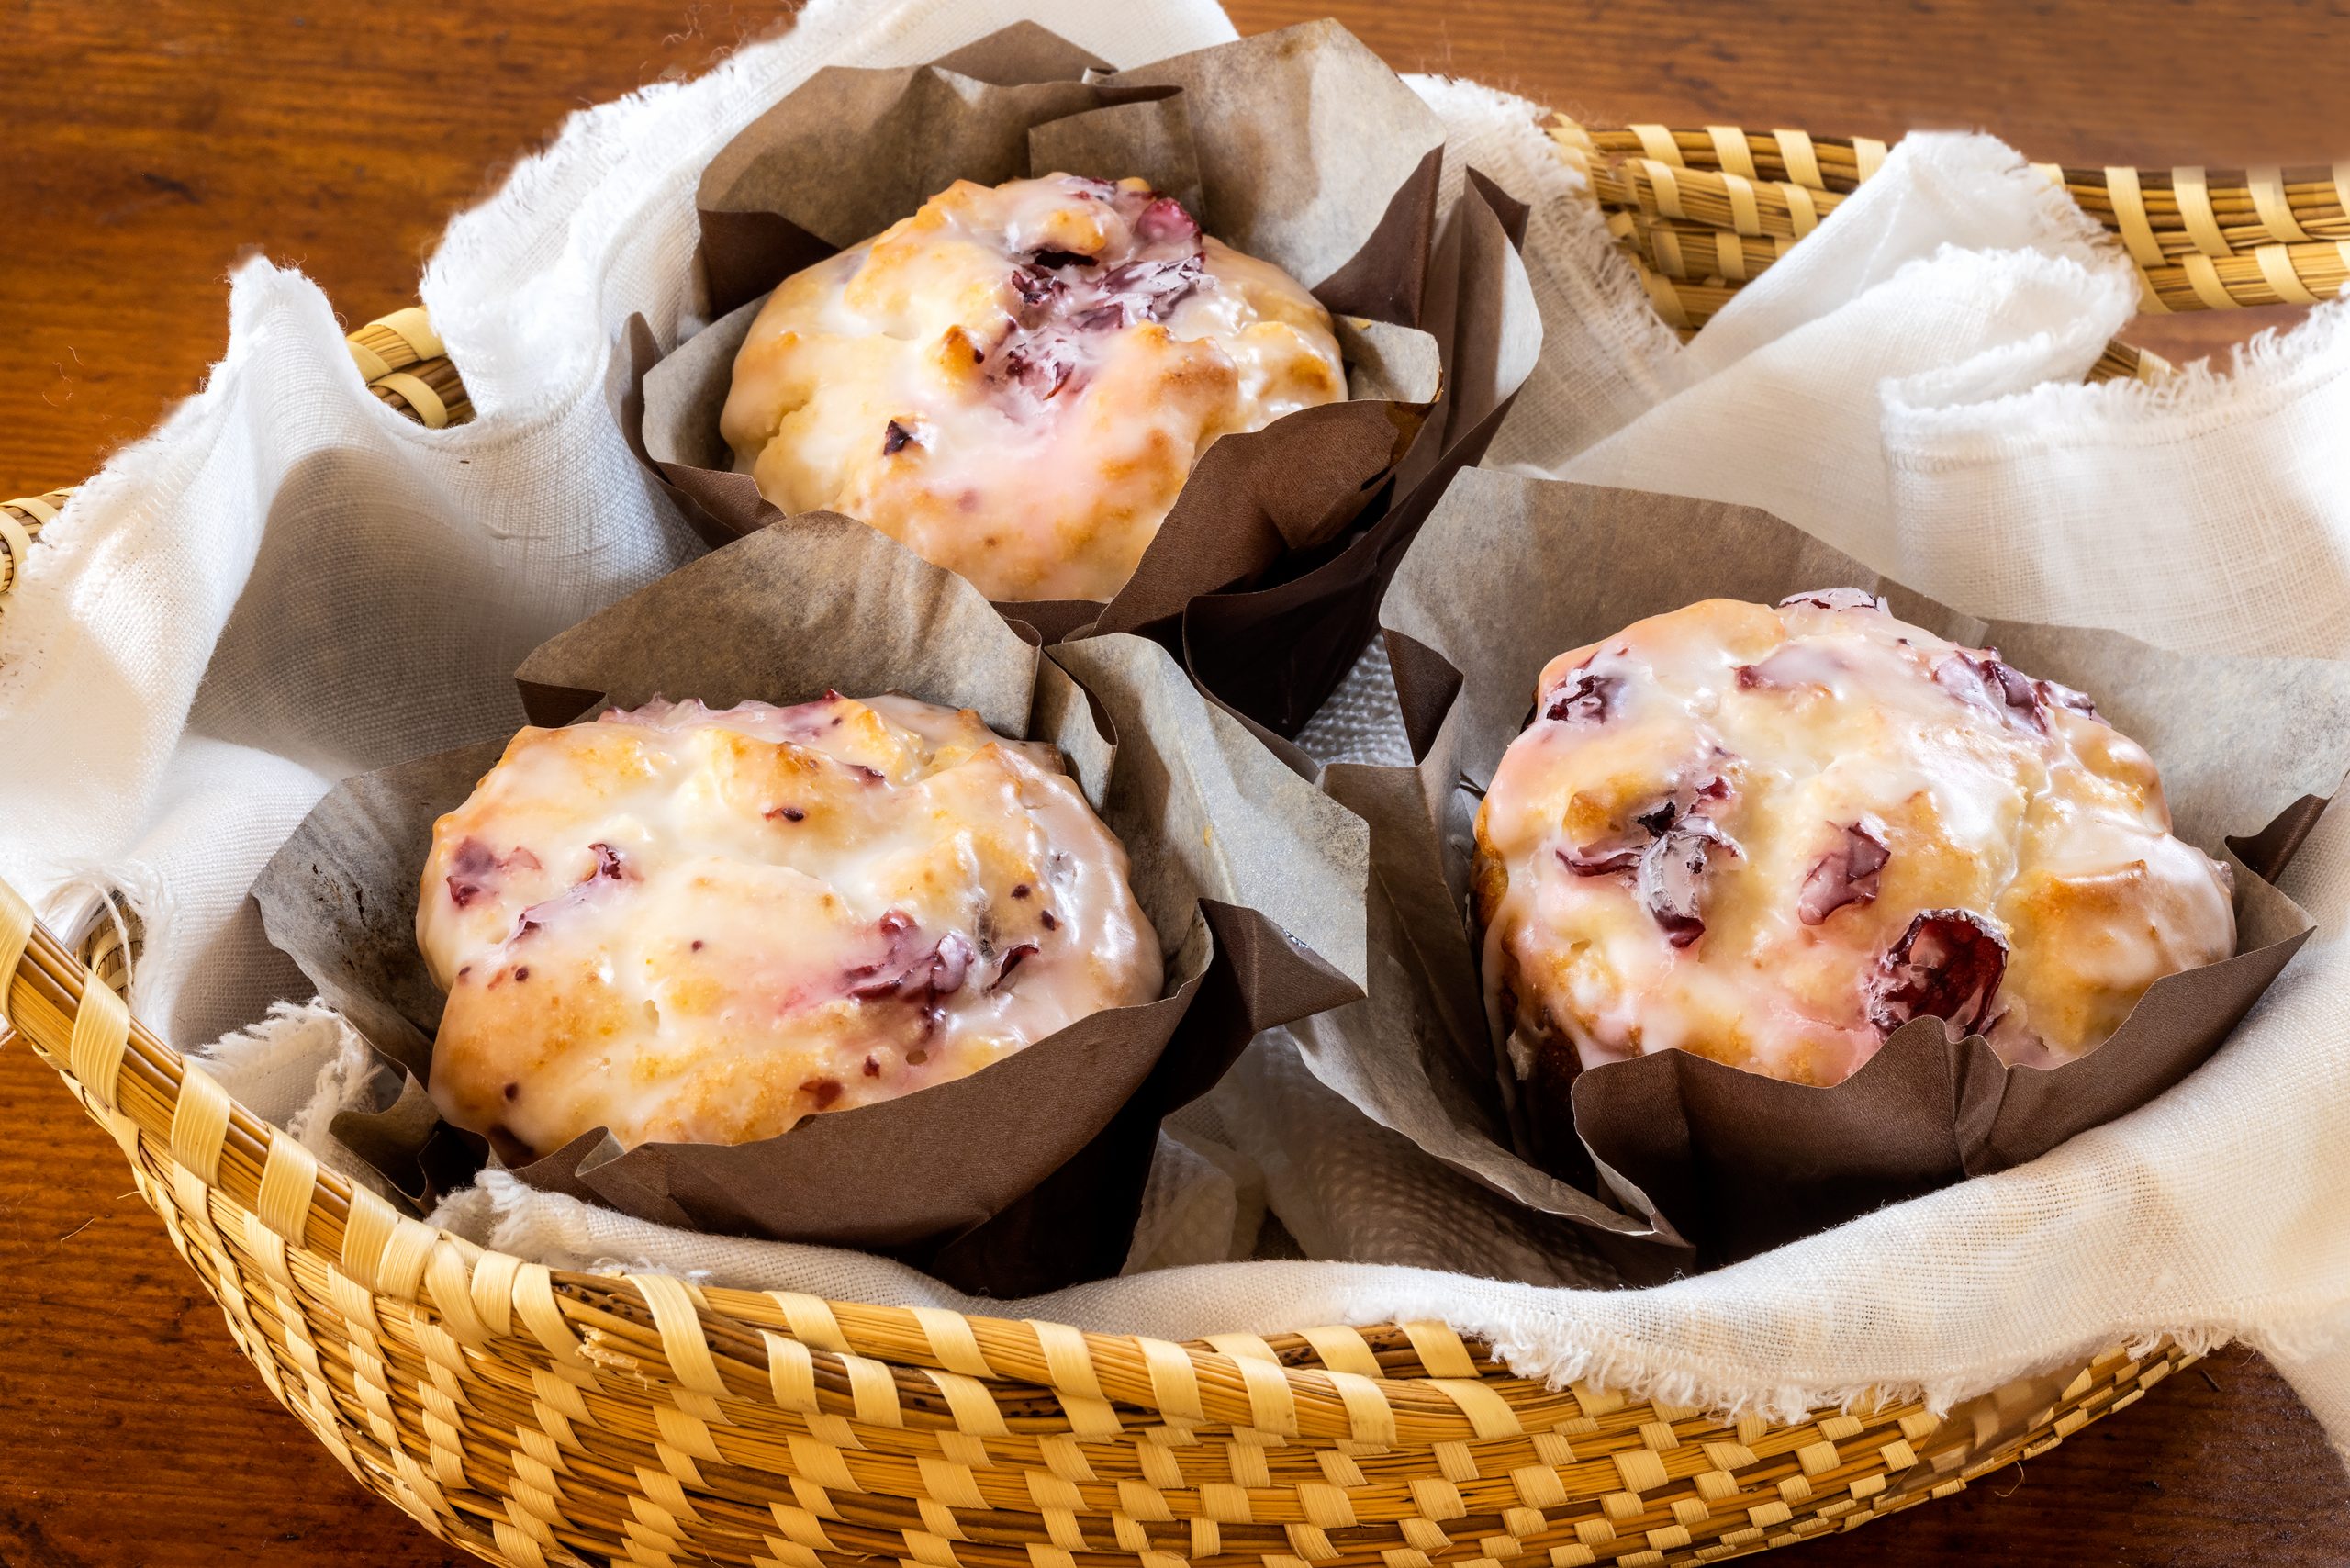 Glaze adds the final sweet touch to almost any muffin; use different liquids to vary the flavor and richness. These cranberry muffins, with a glaze, are served in a sweetgrass basket on a French cheese board, courtesy of McIntosh Cottage Antiques.